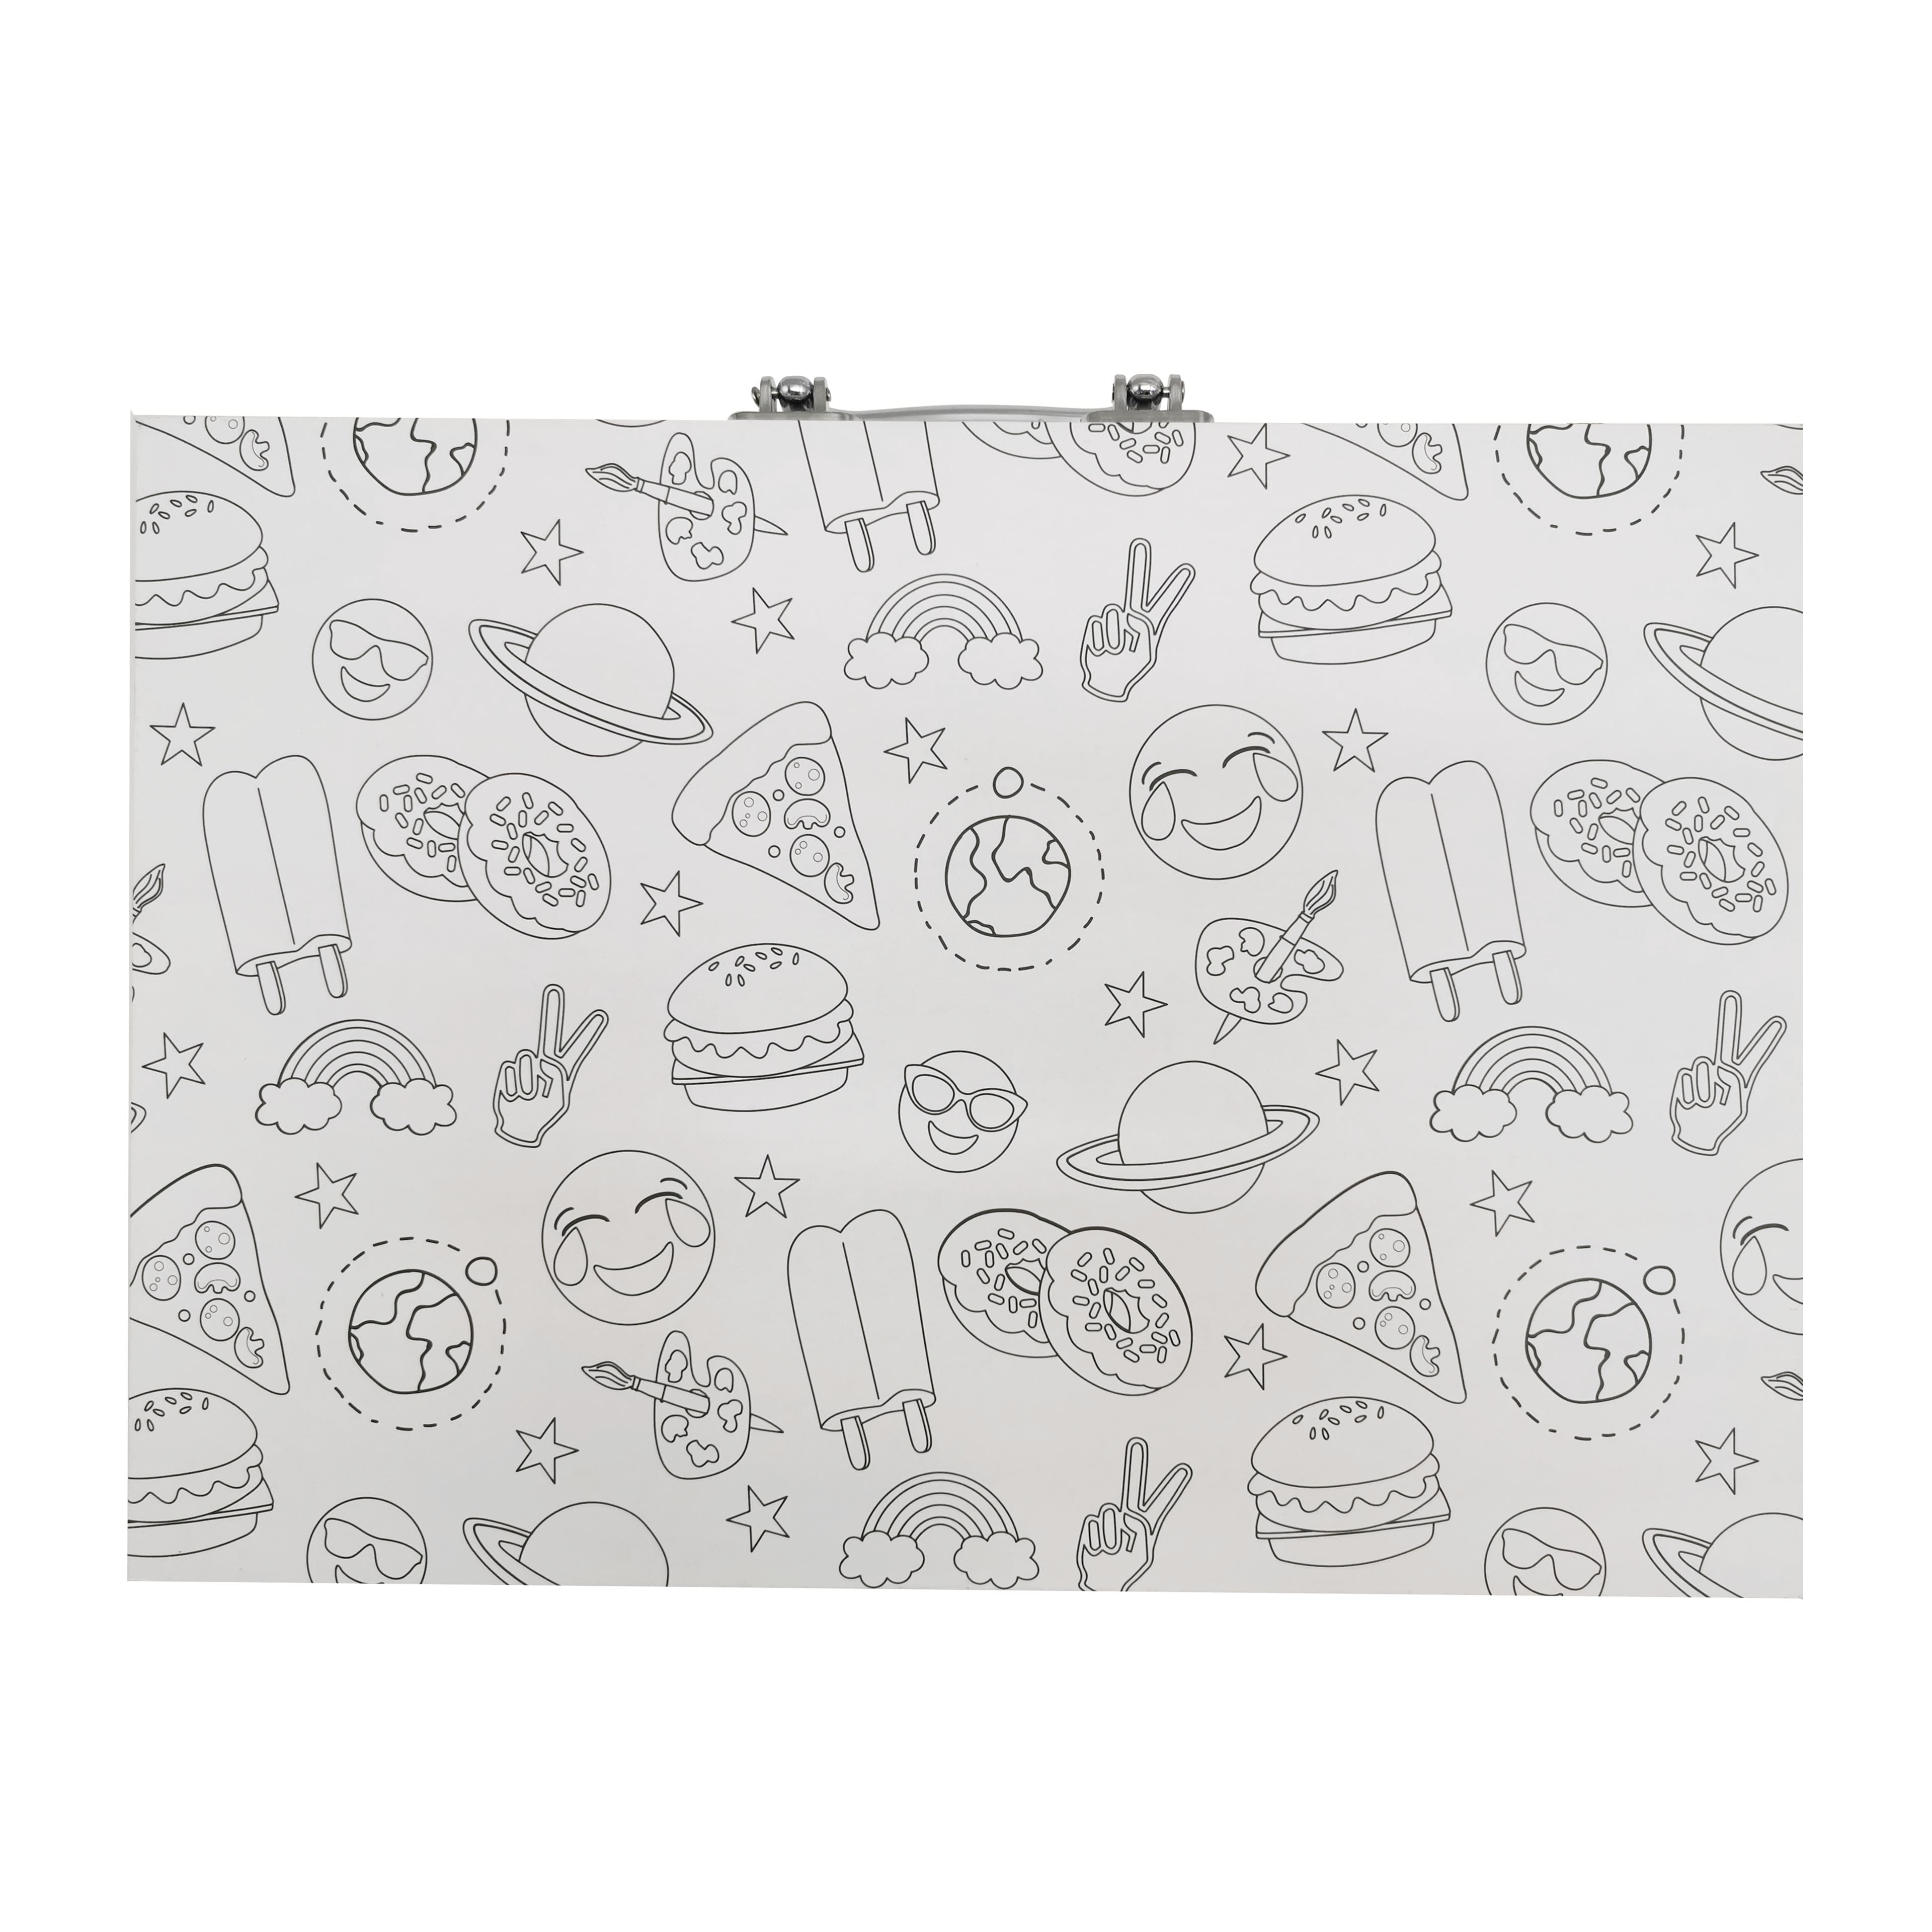 100 Piece Kid's Art Tote by Creatology™